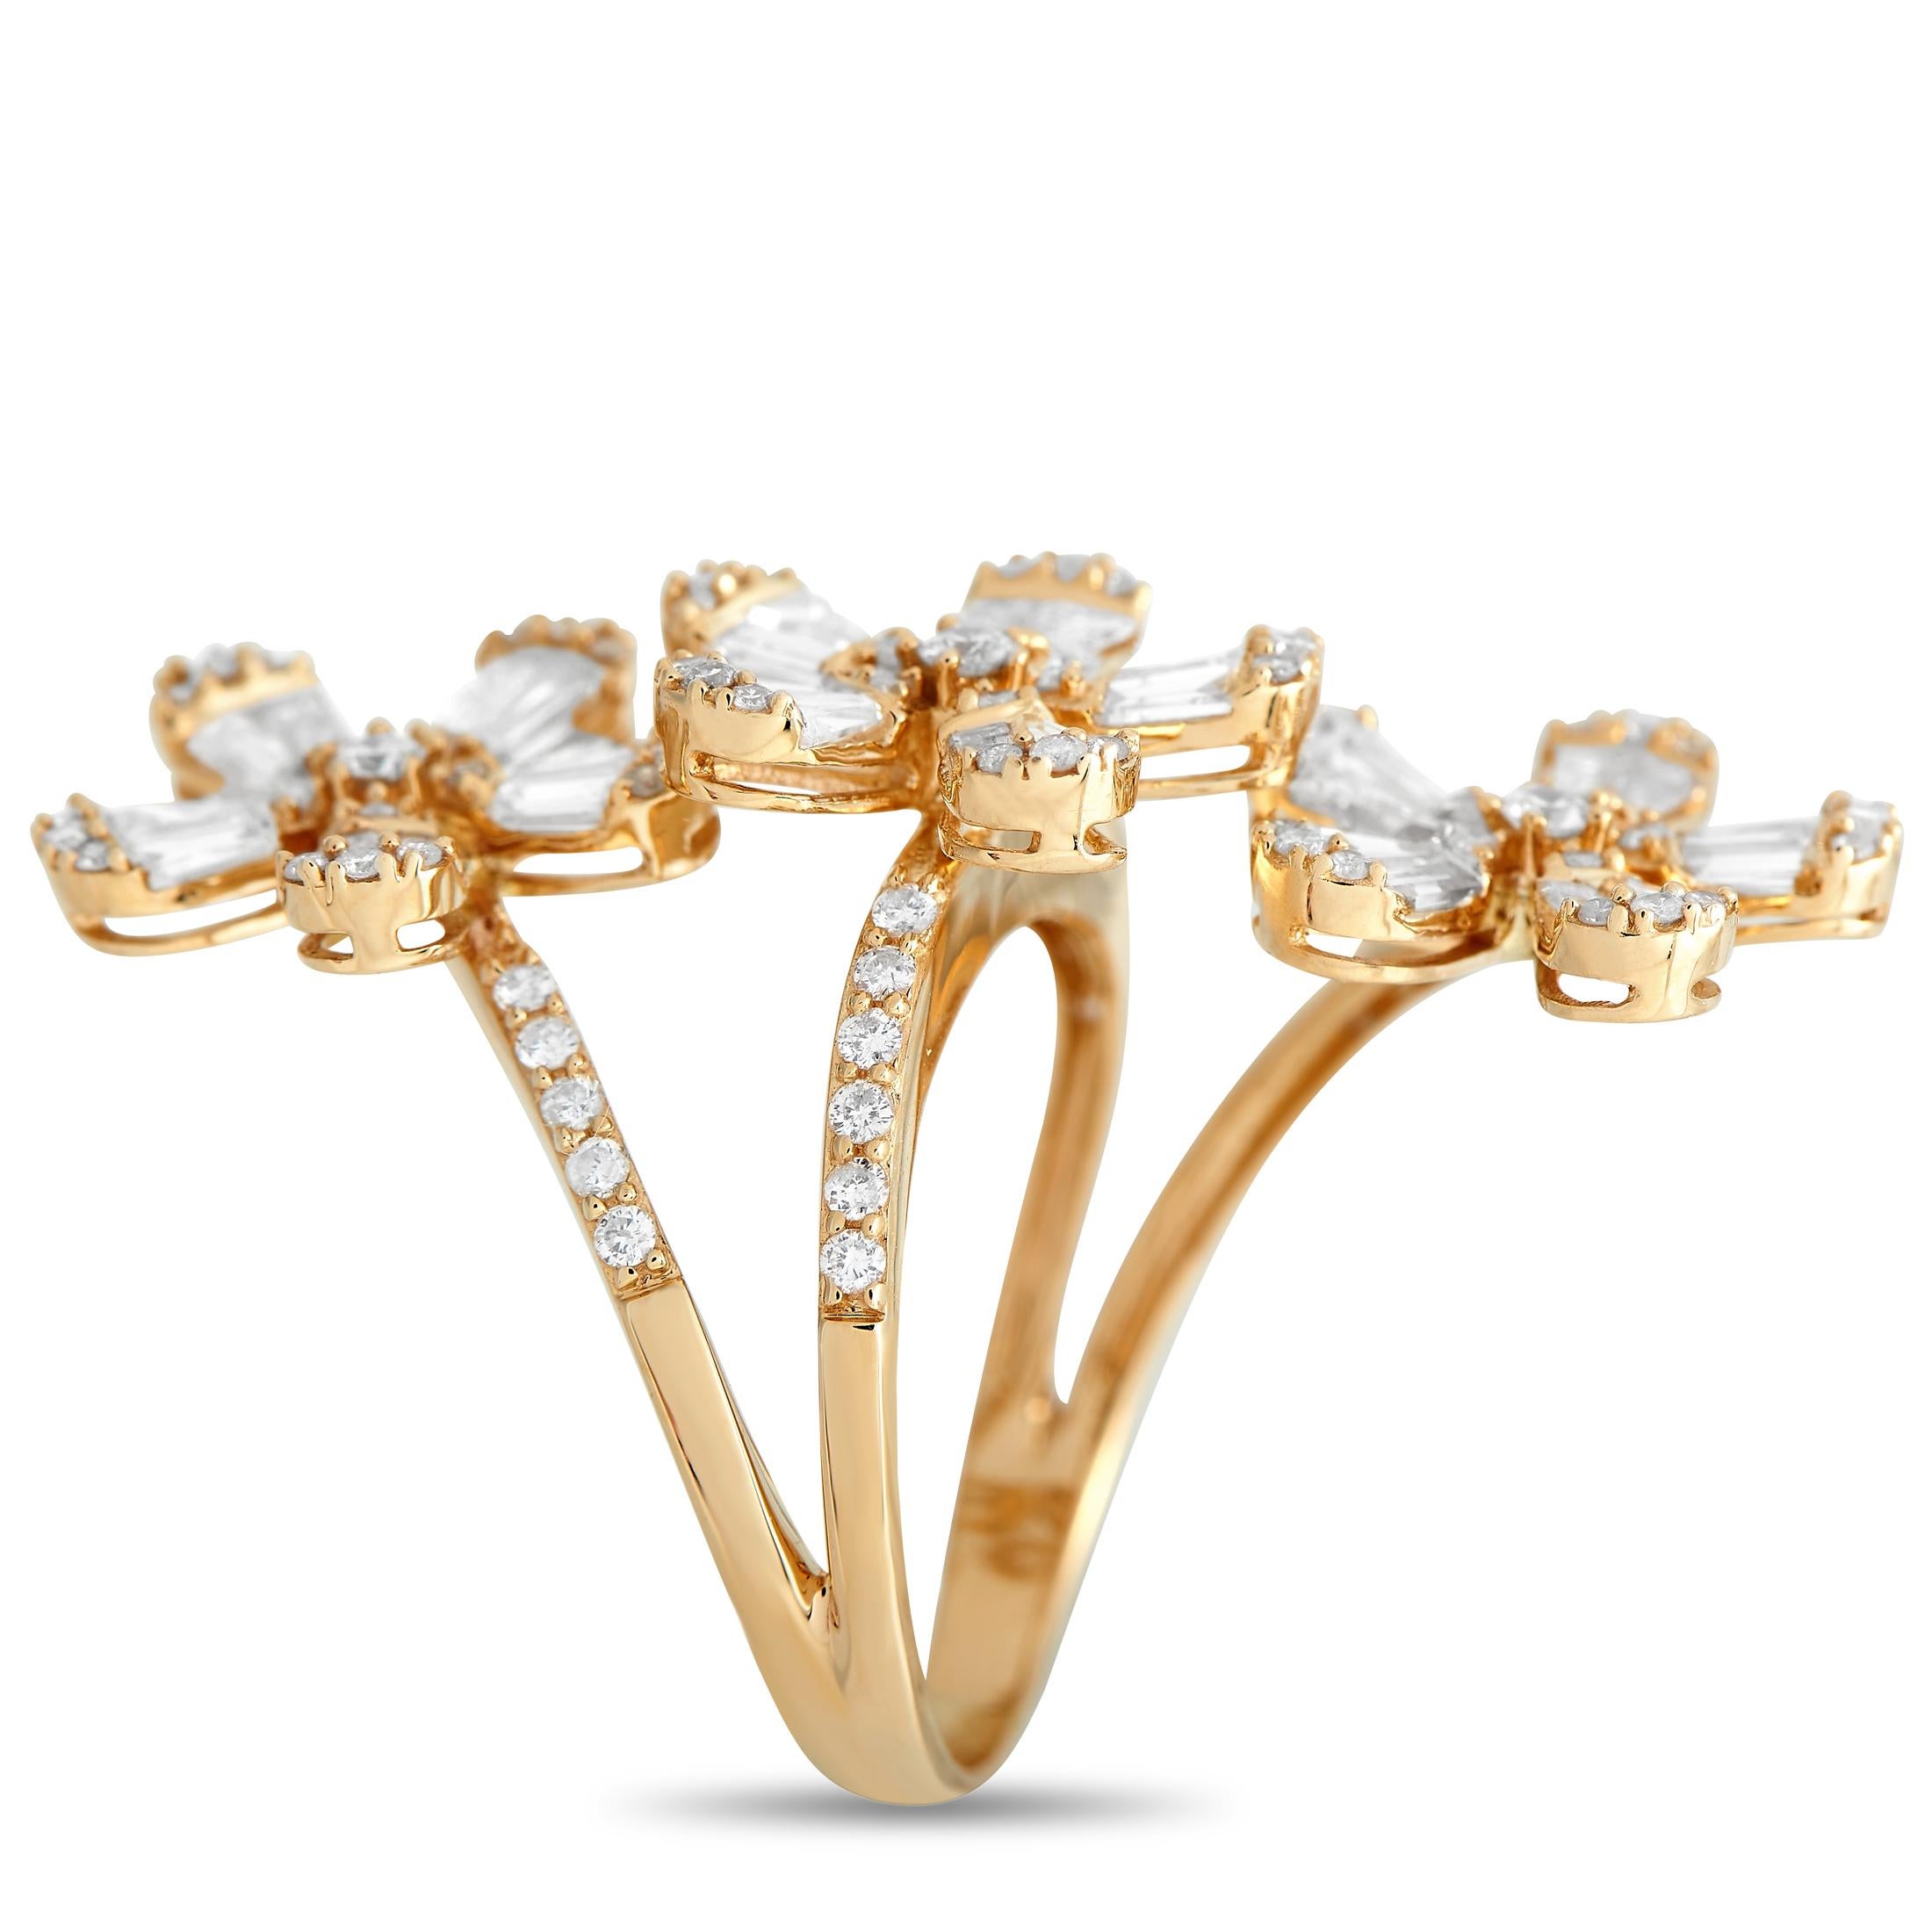 There are many things to love about this ring. It has a split shank design that gives the illusion of three stacked bands. The floral trio that makes up the centerpiece covers the finger with enough glitter to make a stylish statement. With a